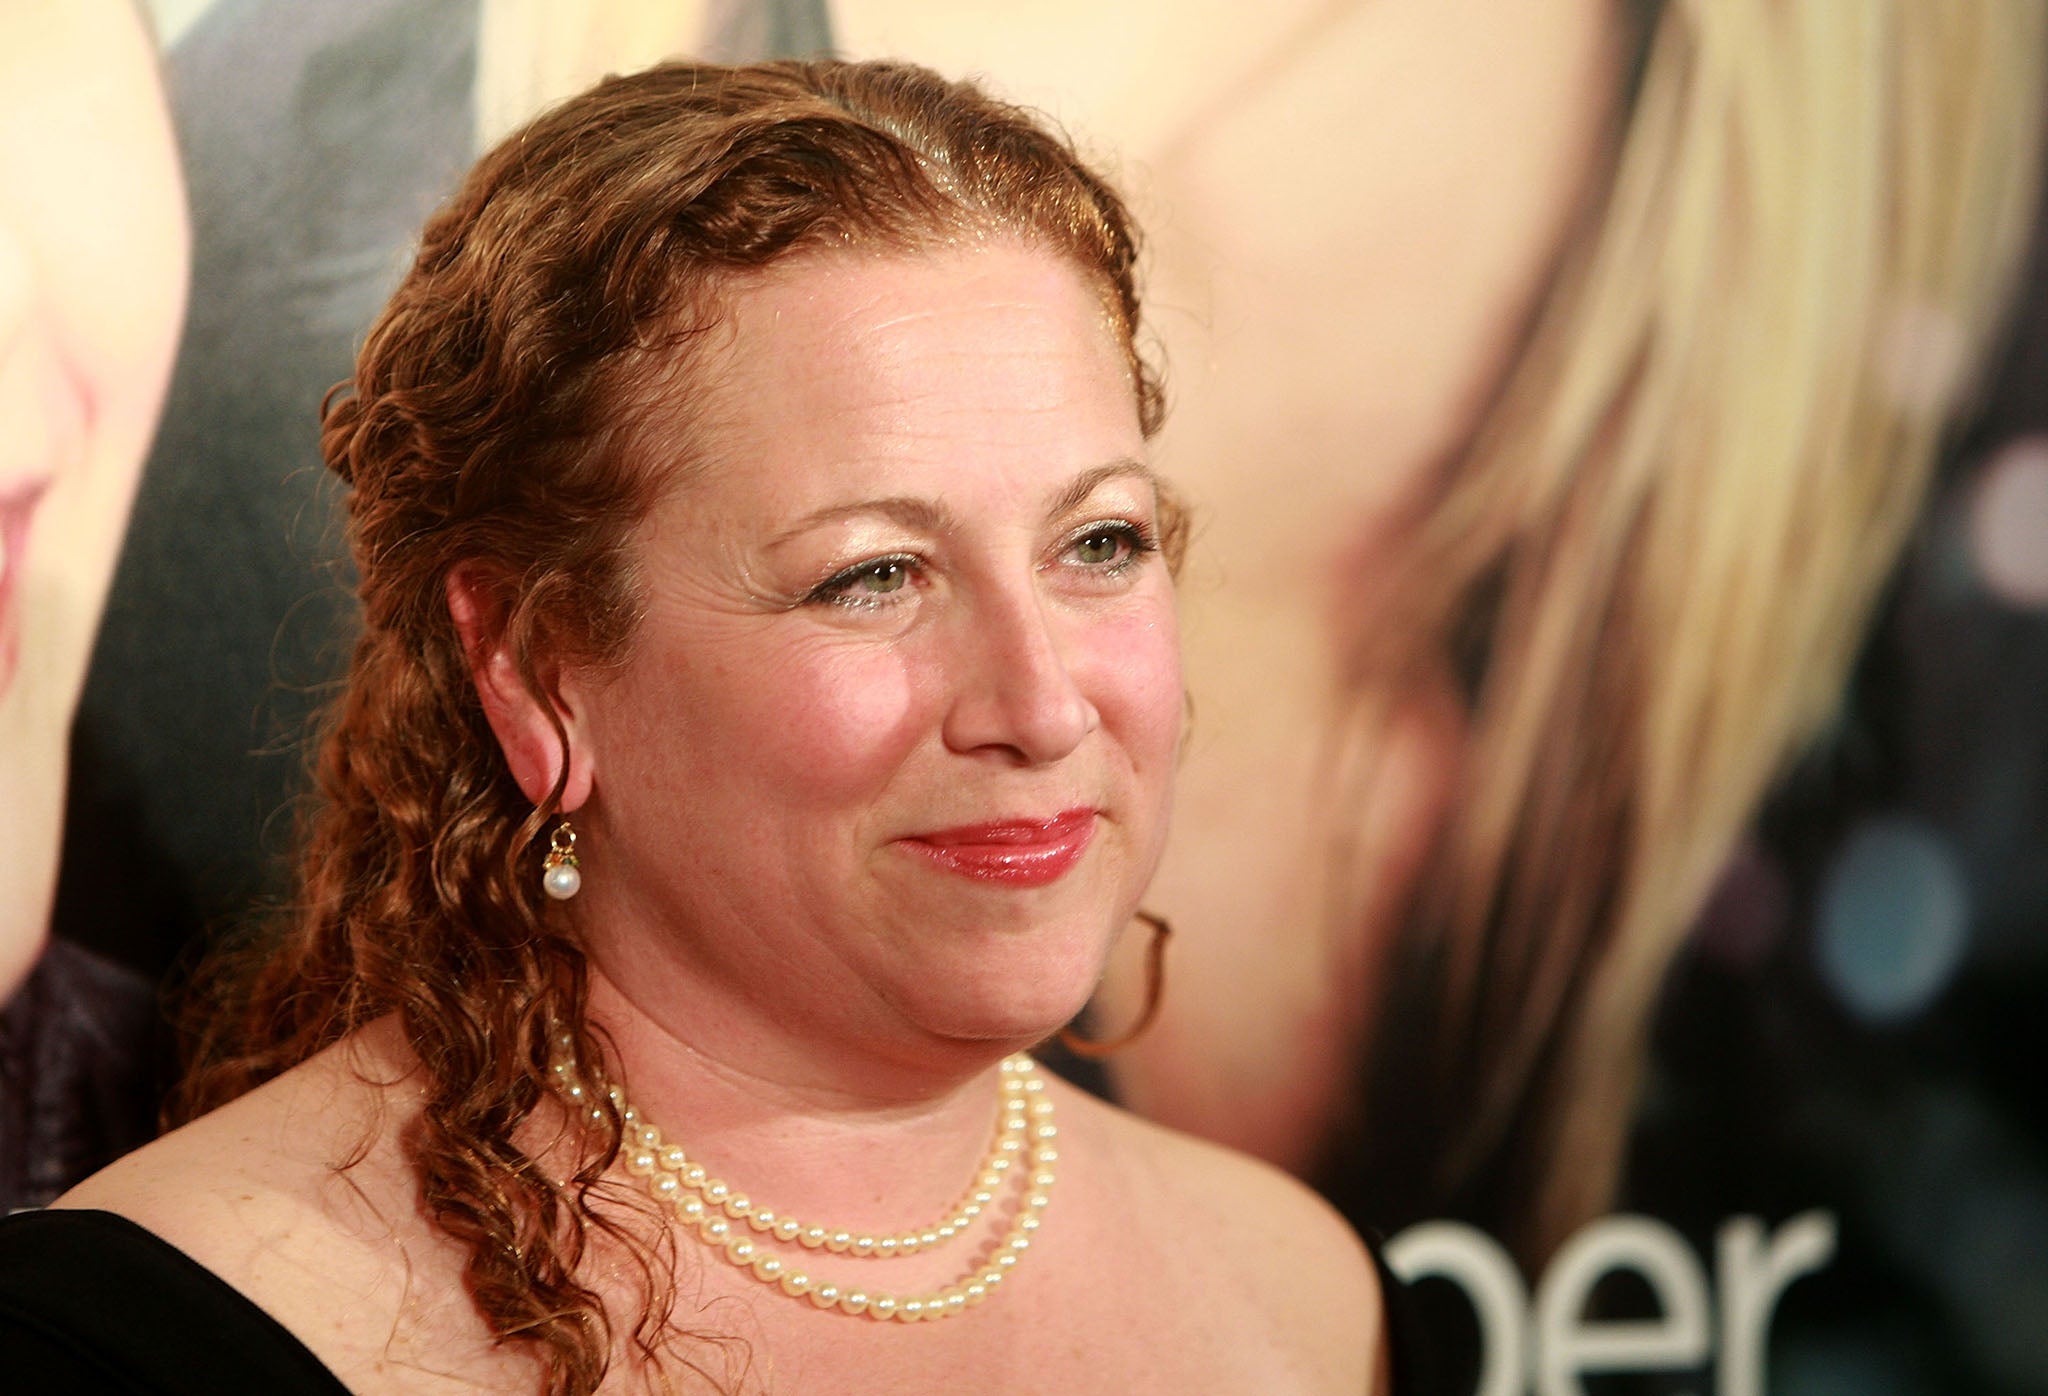 Jodi Picoult has spoken out against sexism in publishing